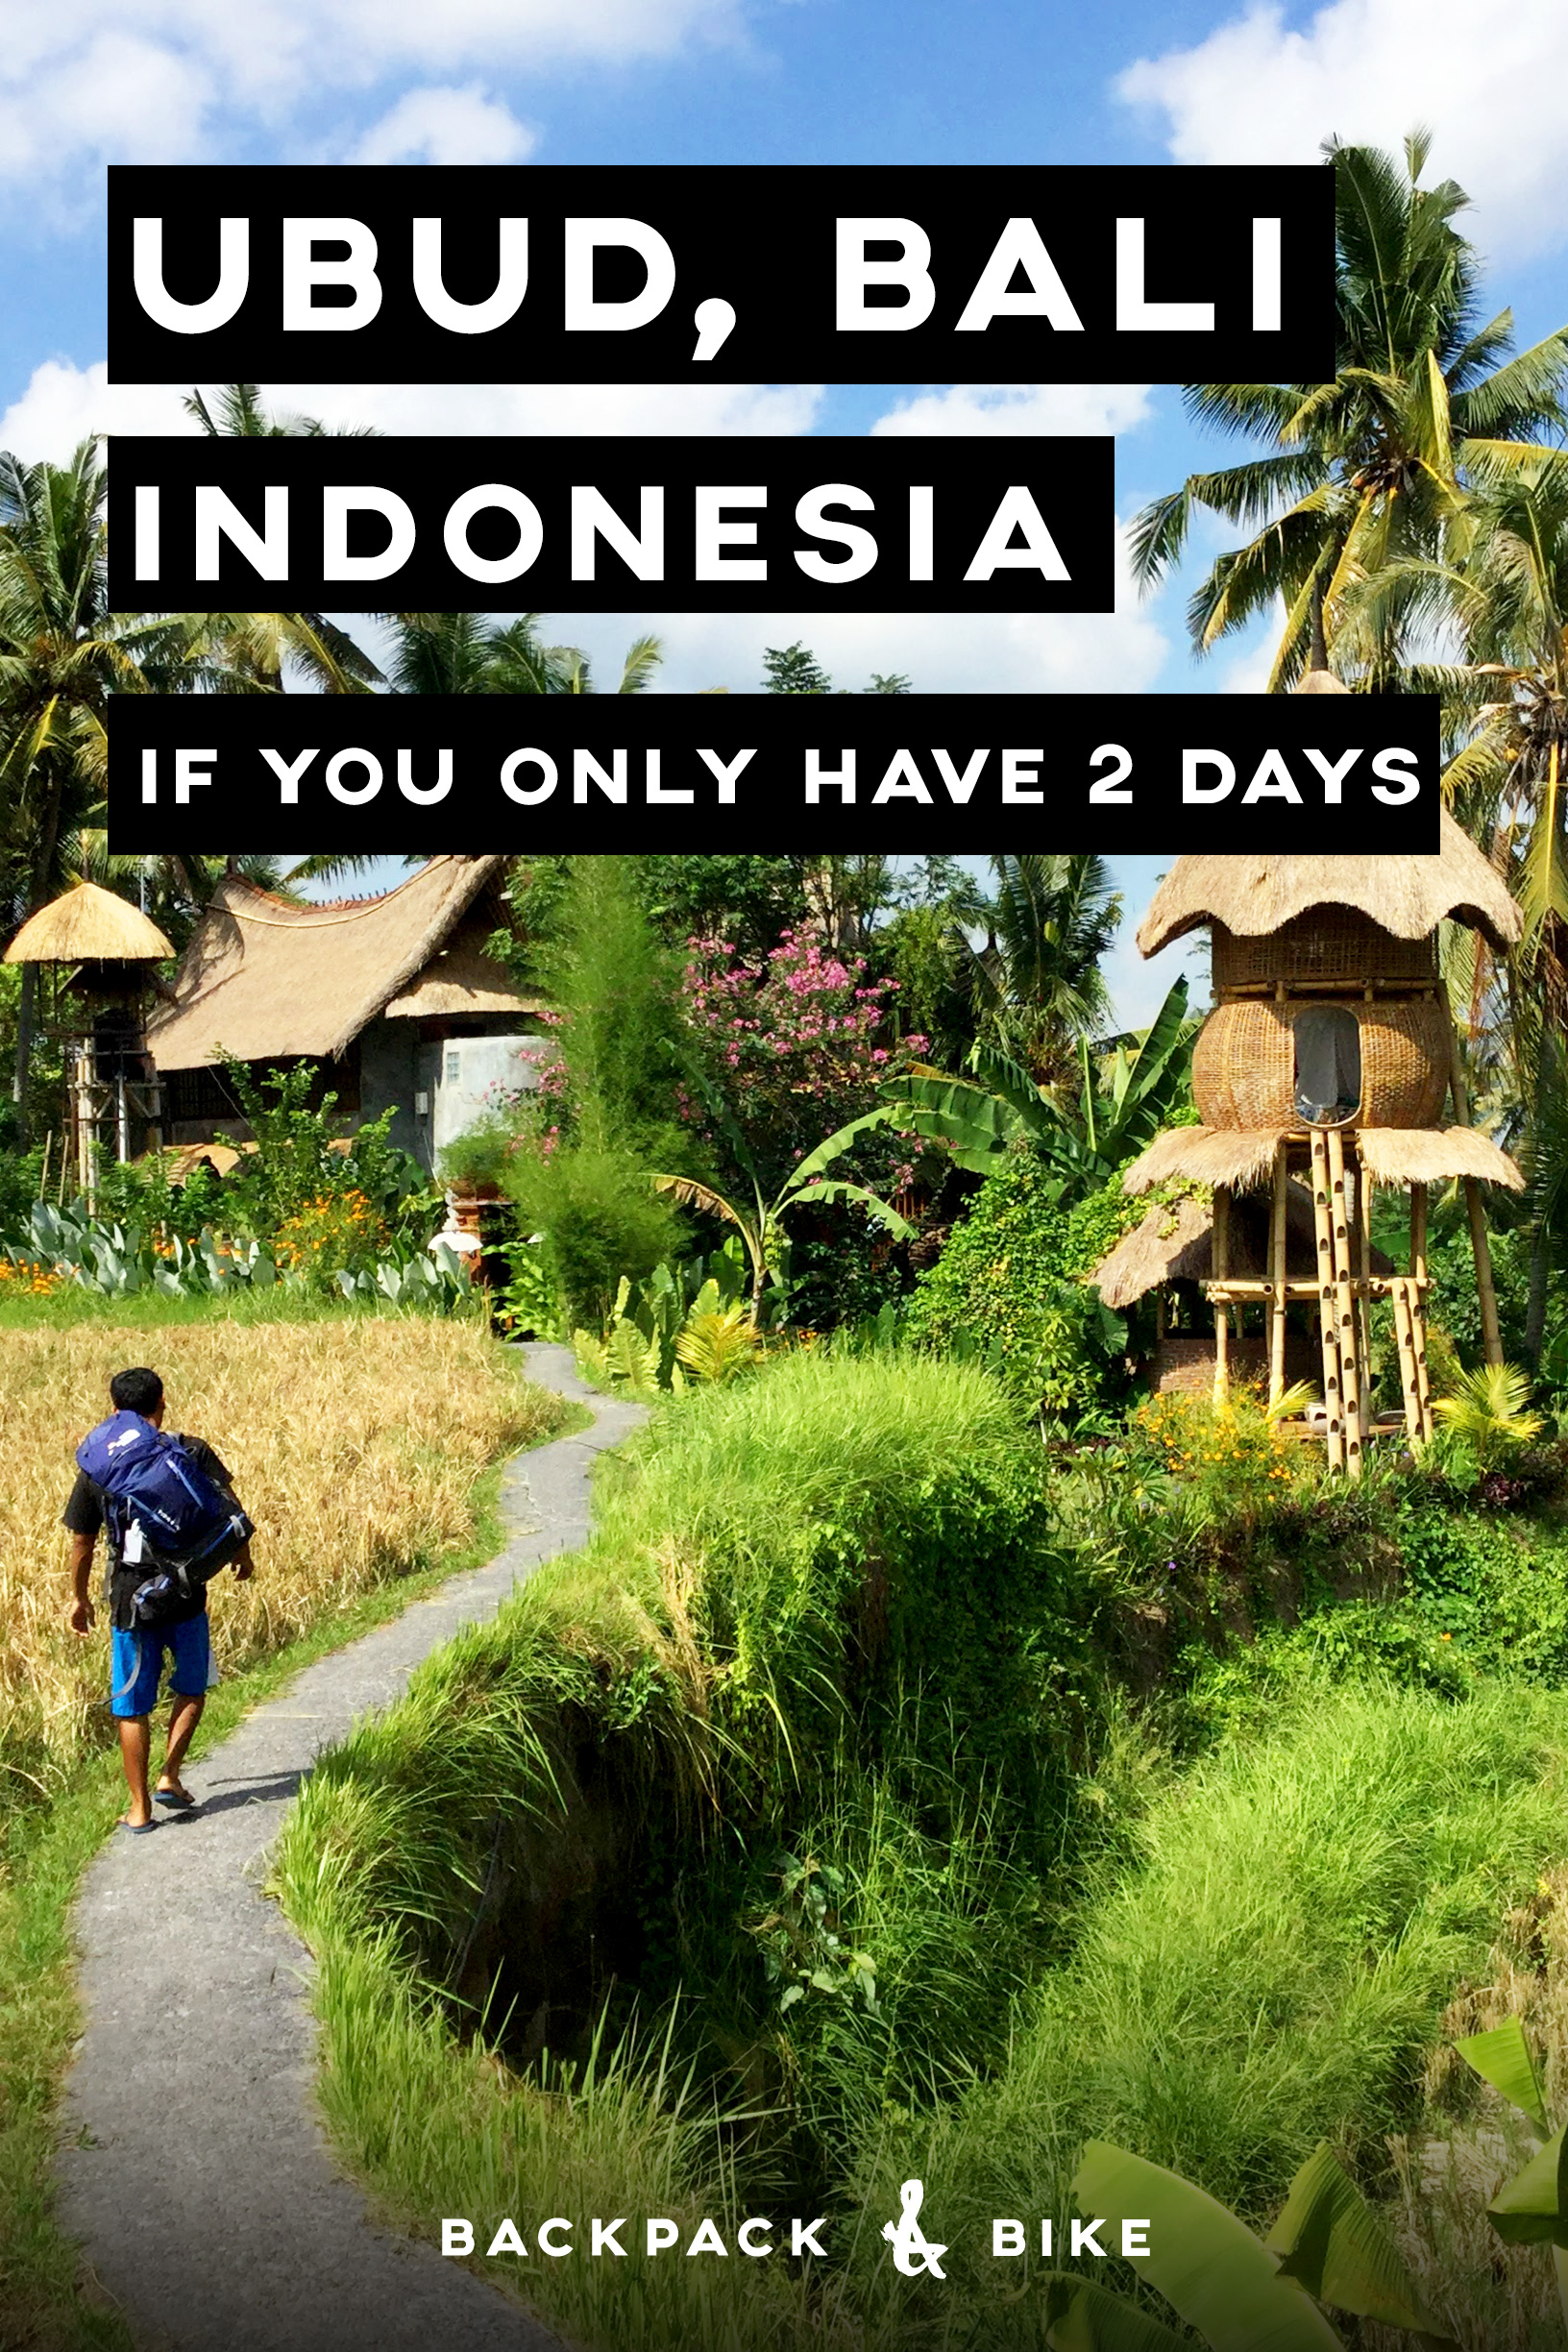 Visiting Ubud Bali if you only have 2 days | When you visit Indonesia, you definitely need to check out Ubud, Bali. If you're only there for a short time, here is how to make the most of it, even on a backpacker budget!